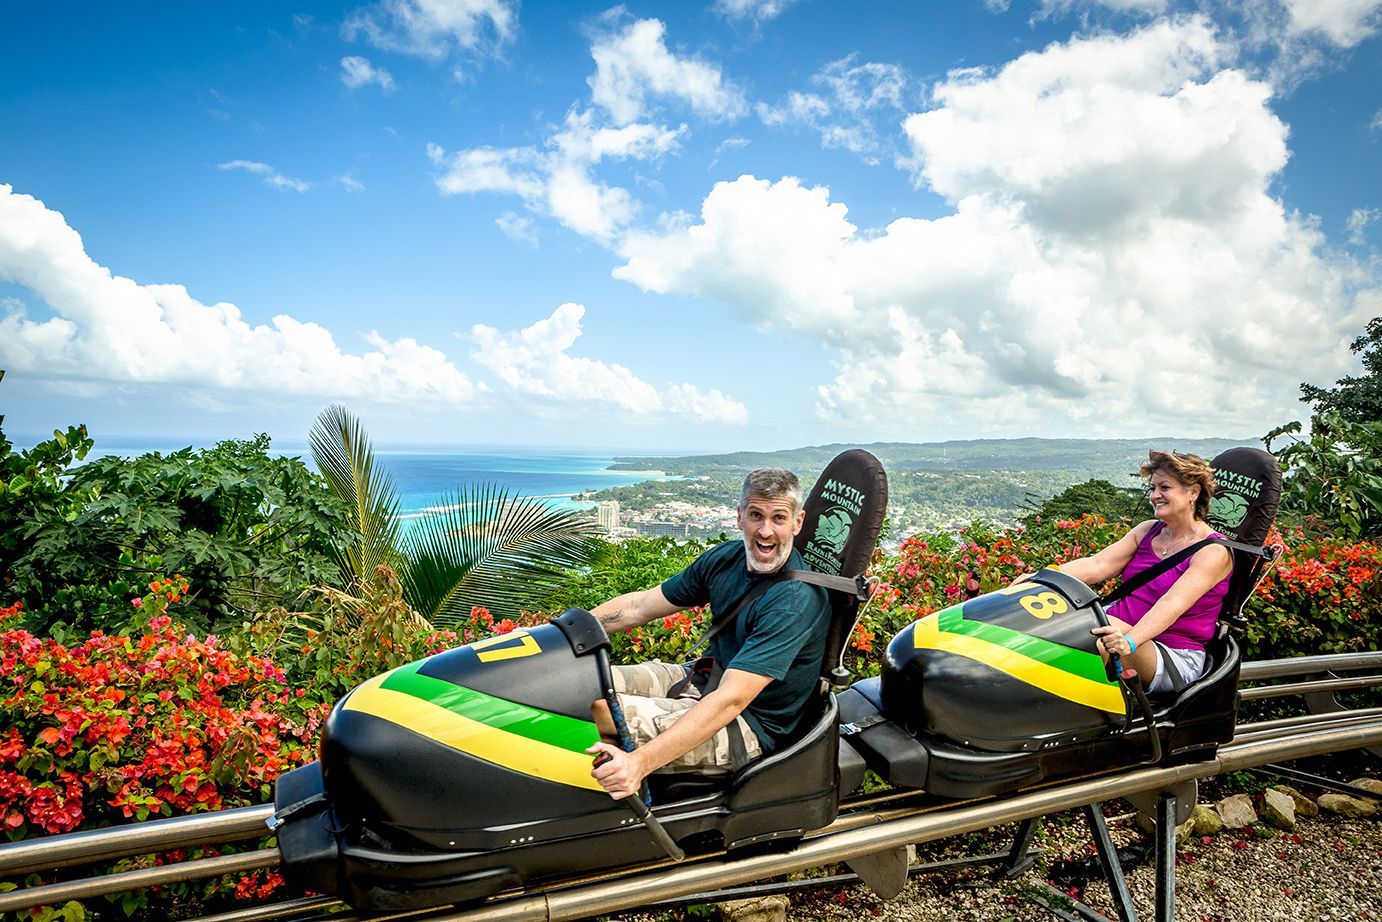 Jamaican Bobsled Adventure At Mystic Mountain